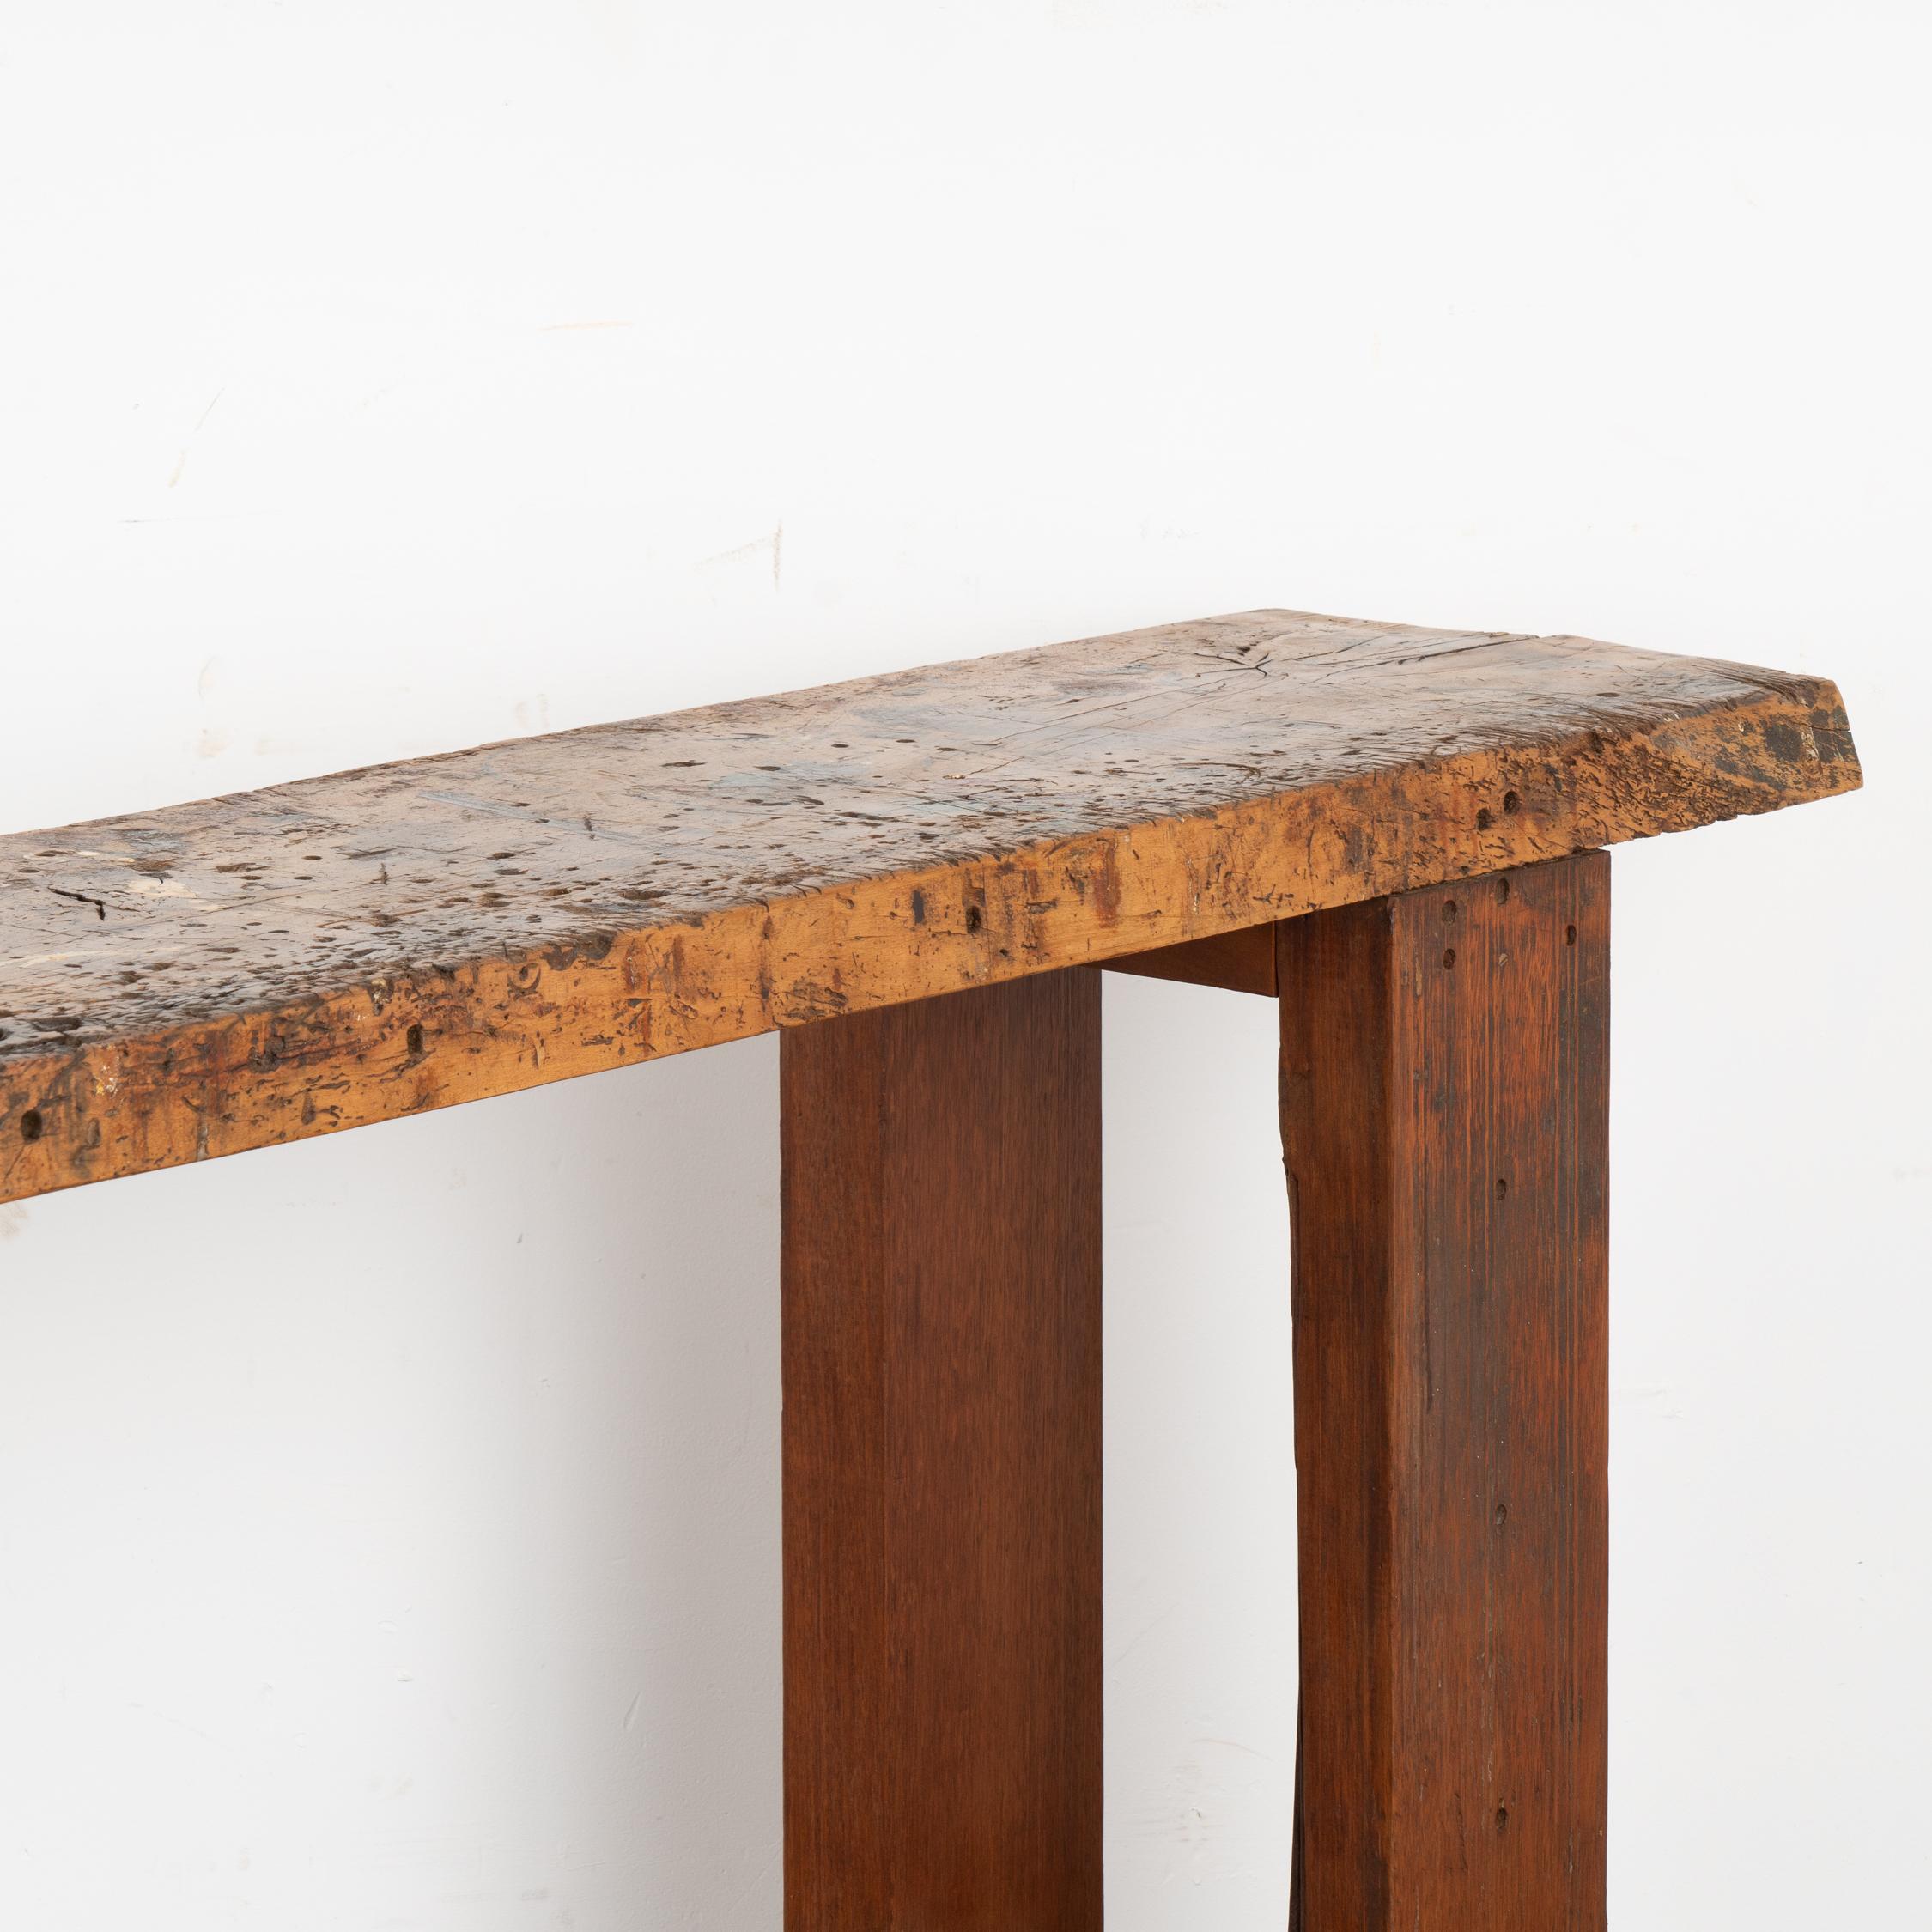  Rustic Console Table With Shelf, Carpenter's Workbench from France circa 1880 3